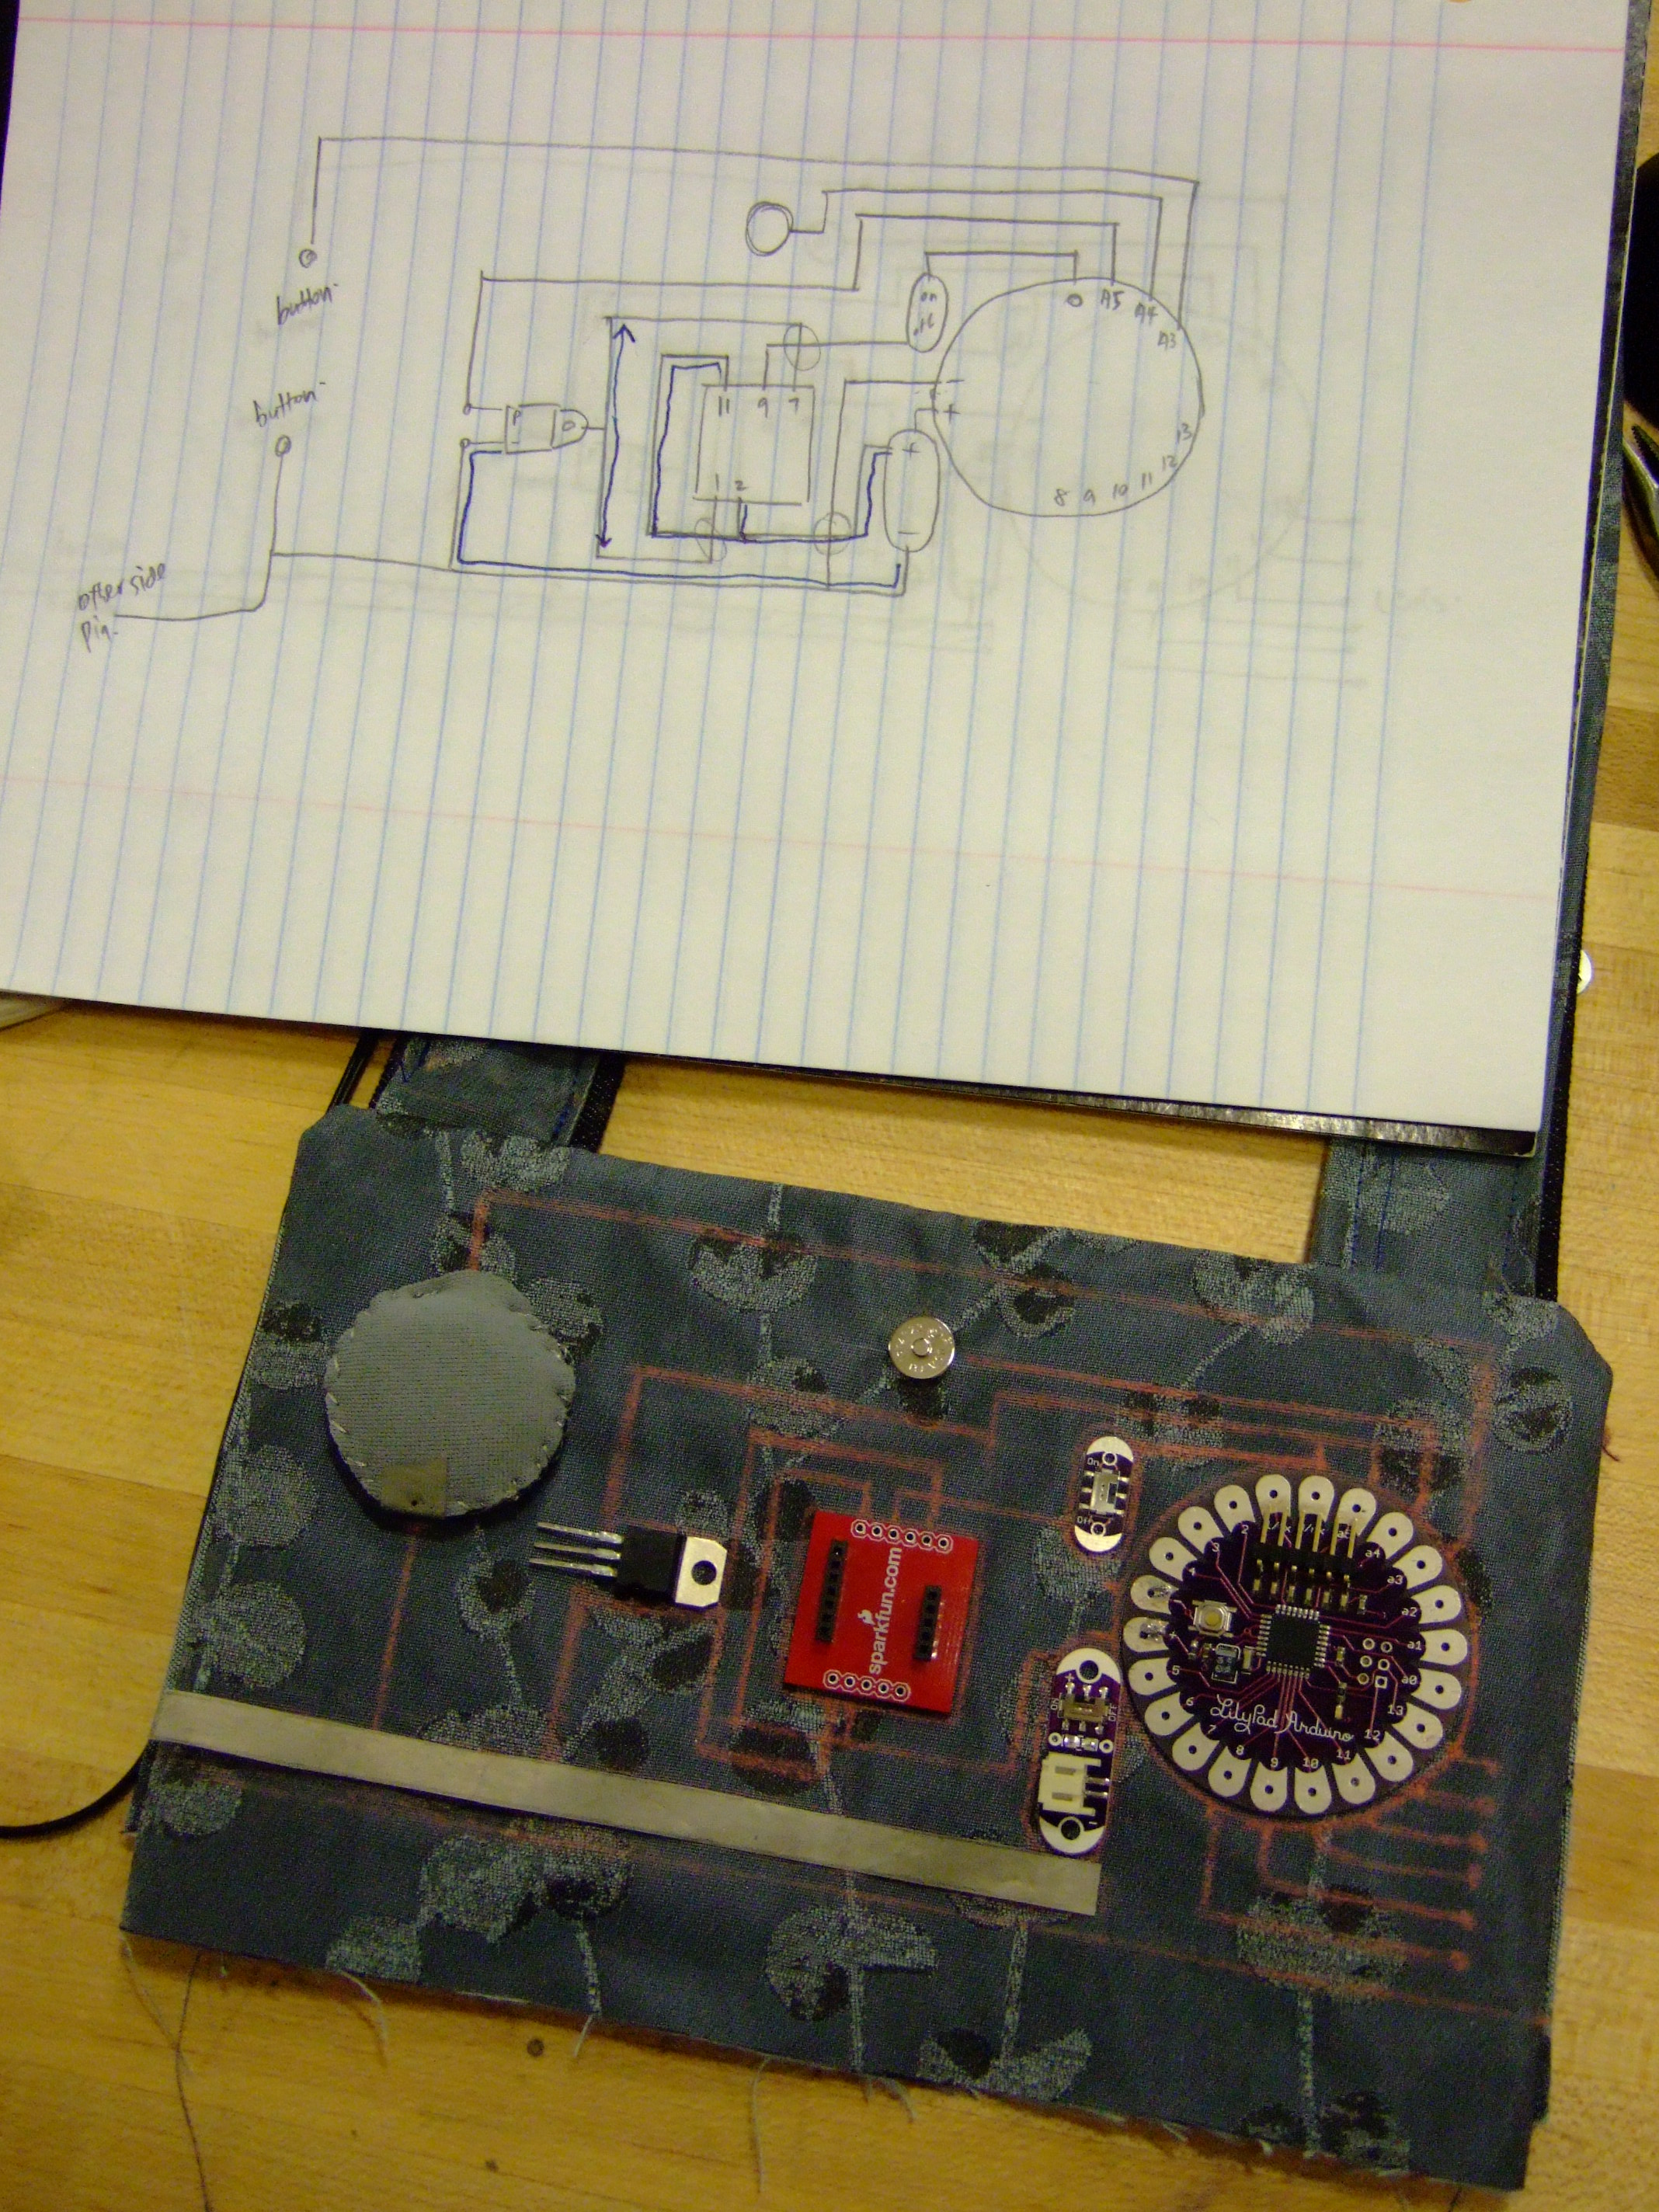 Mapping revised circuitry on actual bag handle